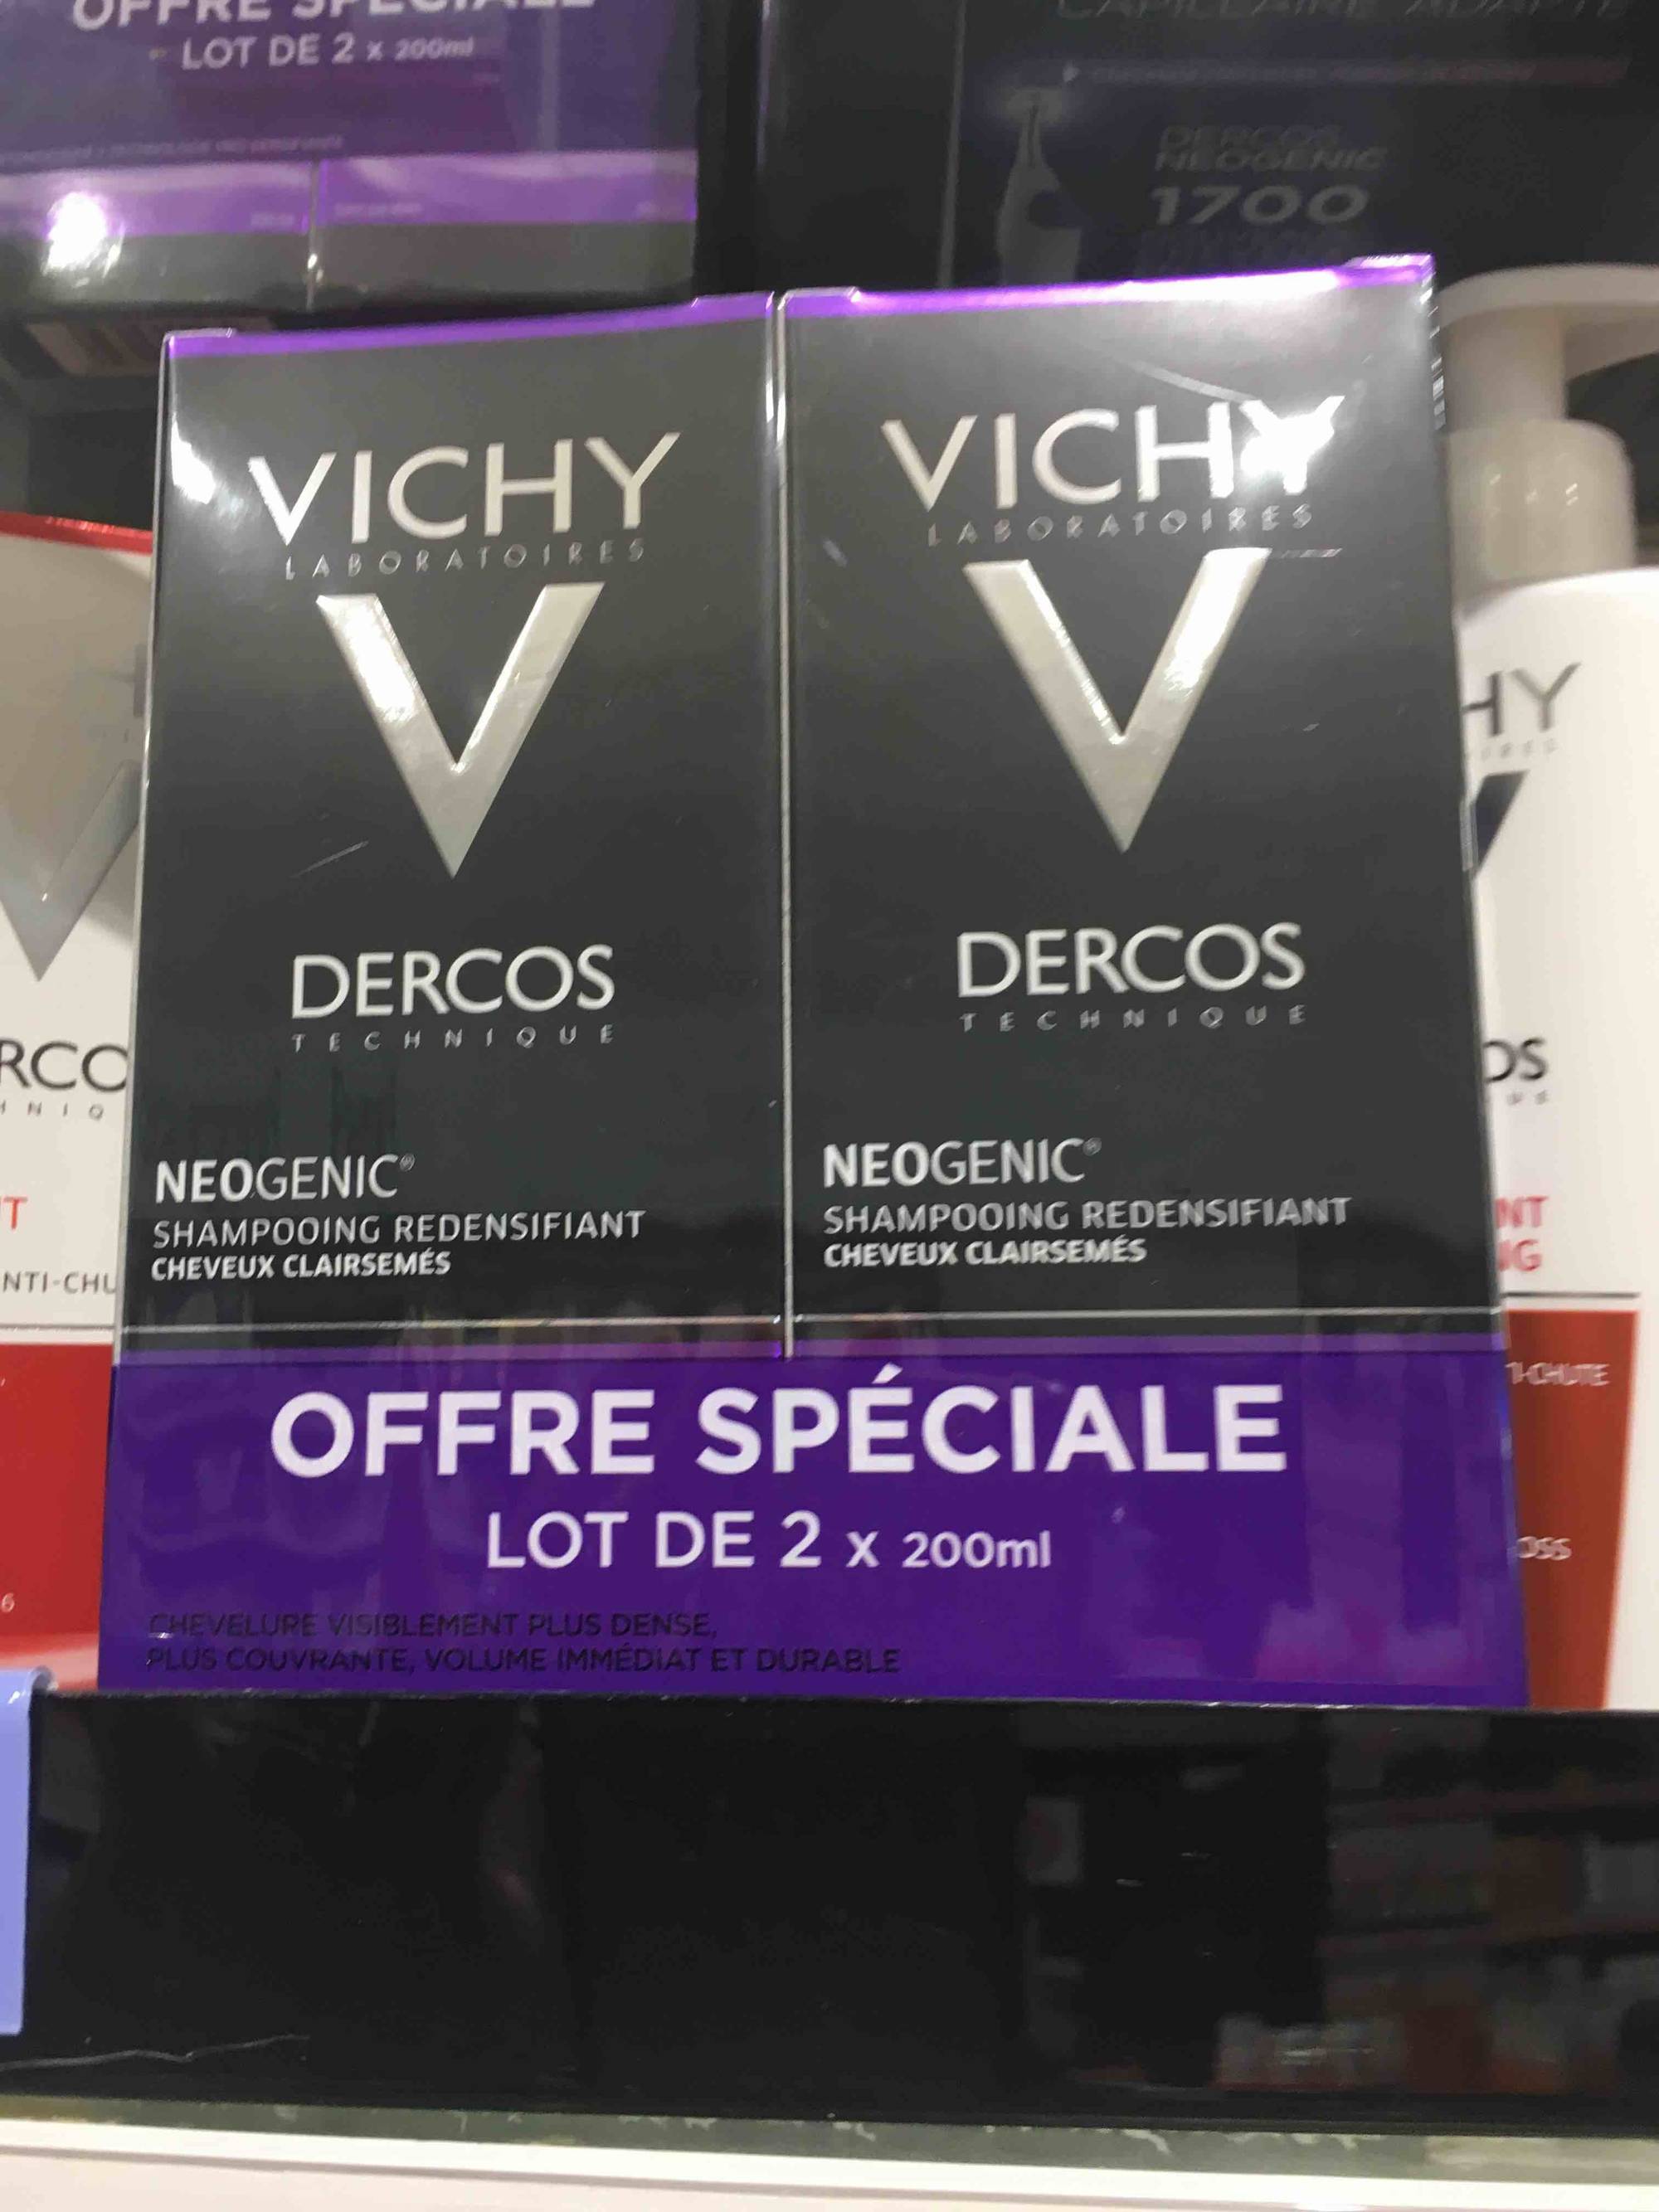 VICHY - Neogenic - Shampooing redensifiant